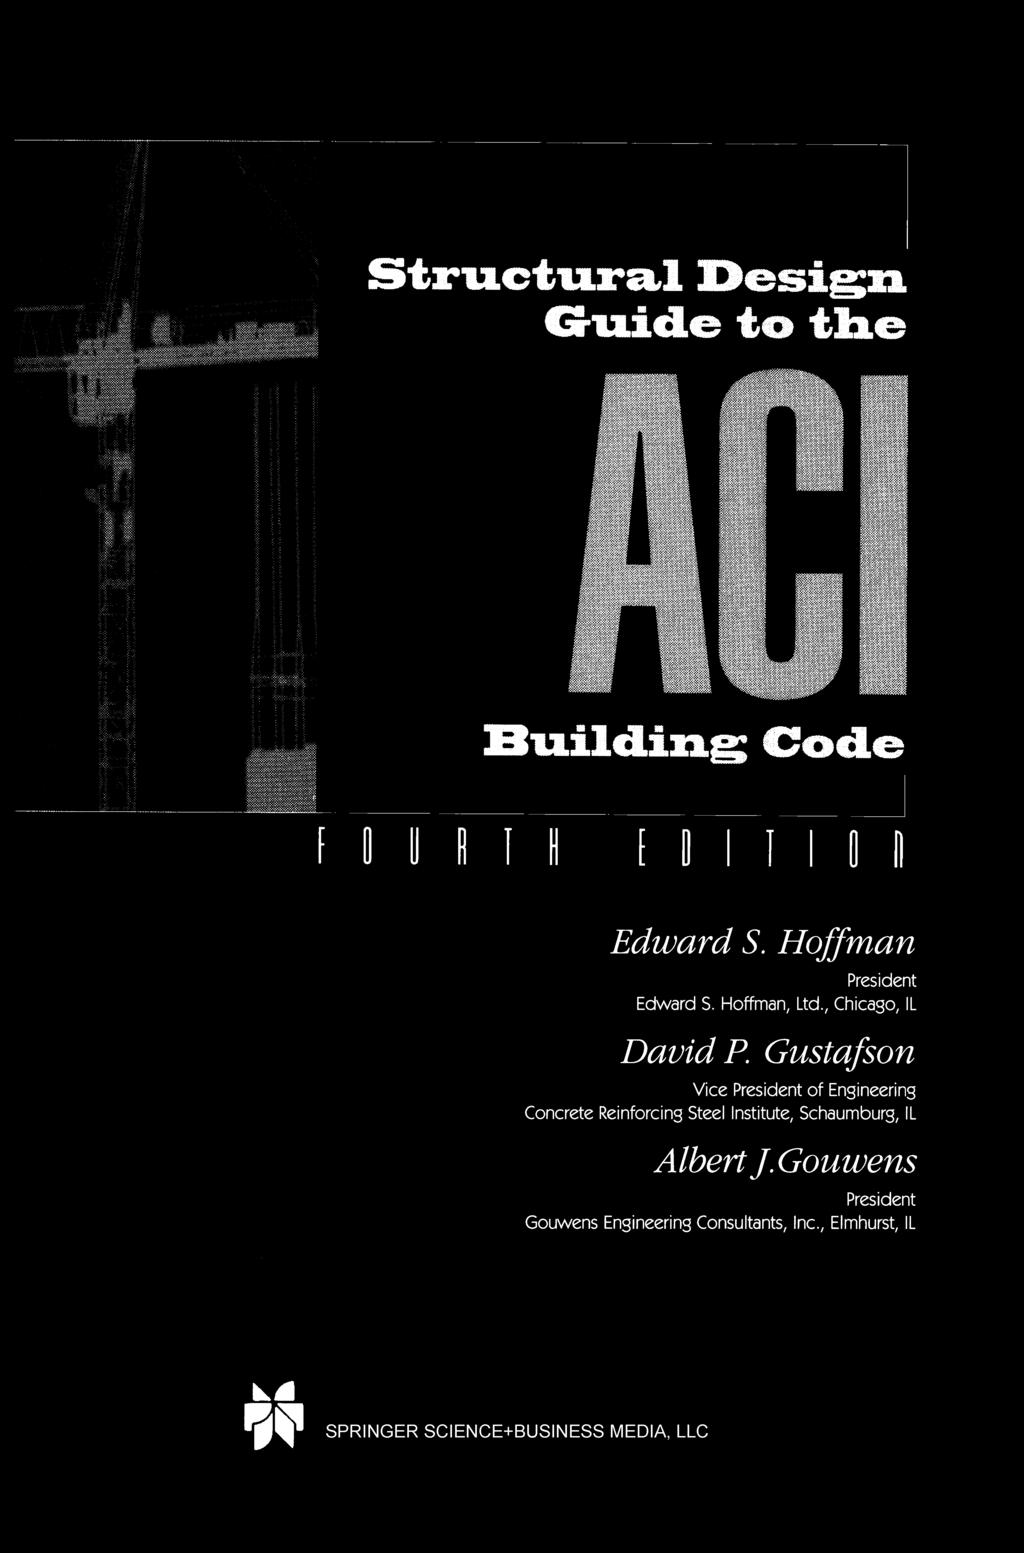 Structural Design Guide to the Building: Code Edward S. Hoffman President Edward S.